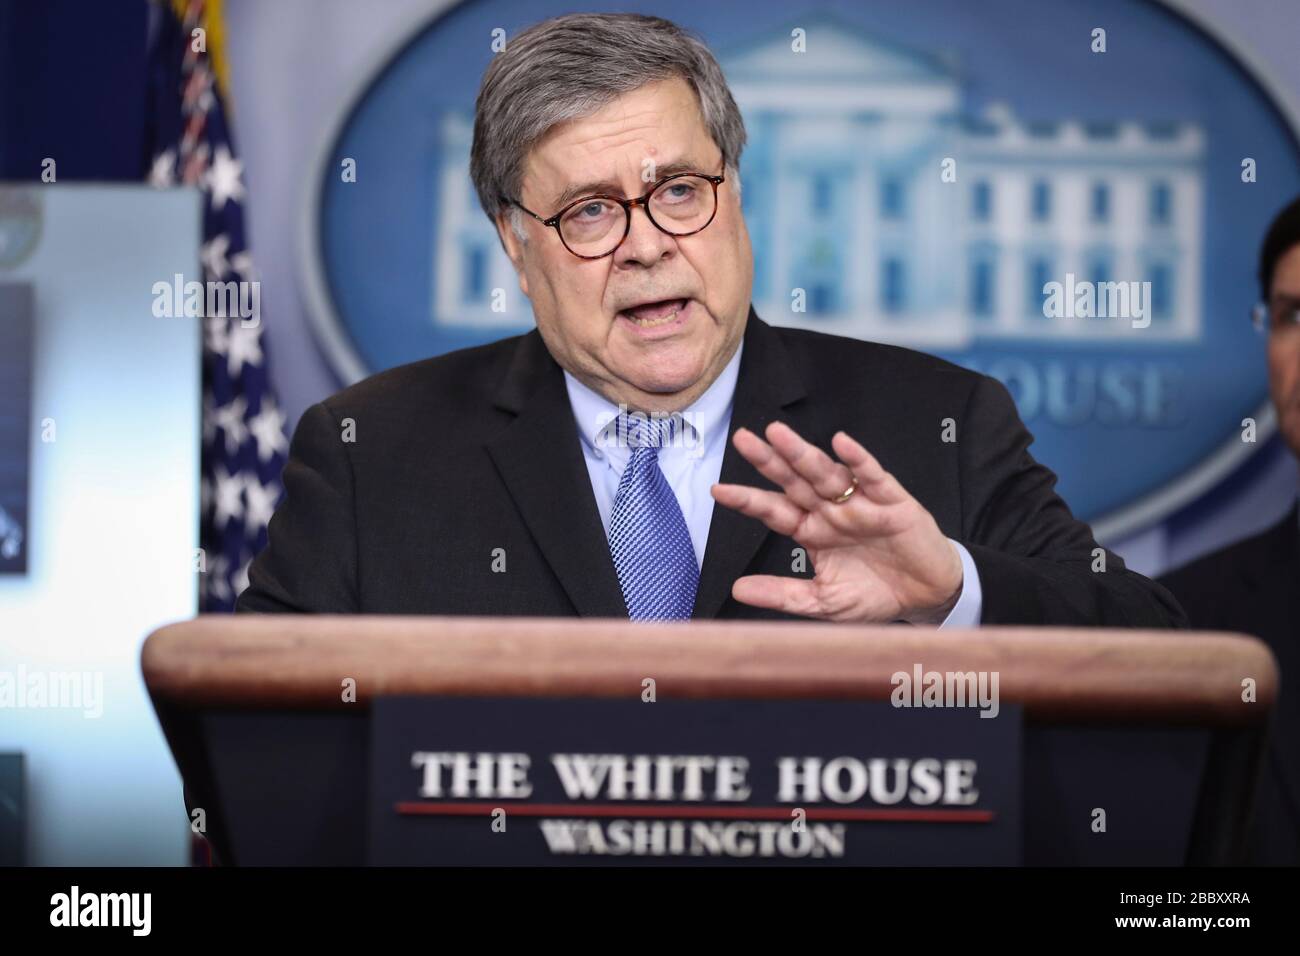 Washington DC, USA. 01st Apr, 2020. United States Attorney General William P. Barr speaks during a press conference in the Brady Press Briefing Room of the White House on April 1, 2020 in Washington, DC. Credit: MediaPunch Inc/Alamy Live News Stock Photo